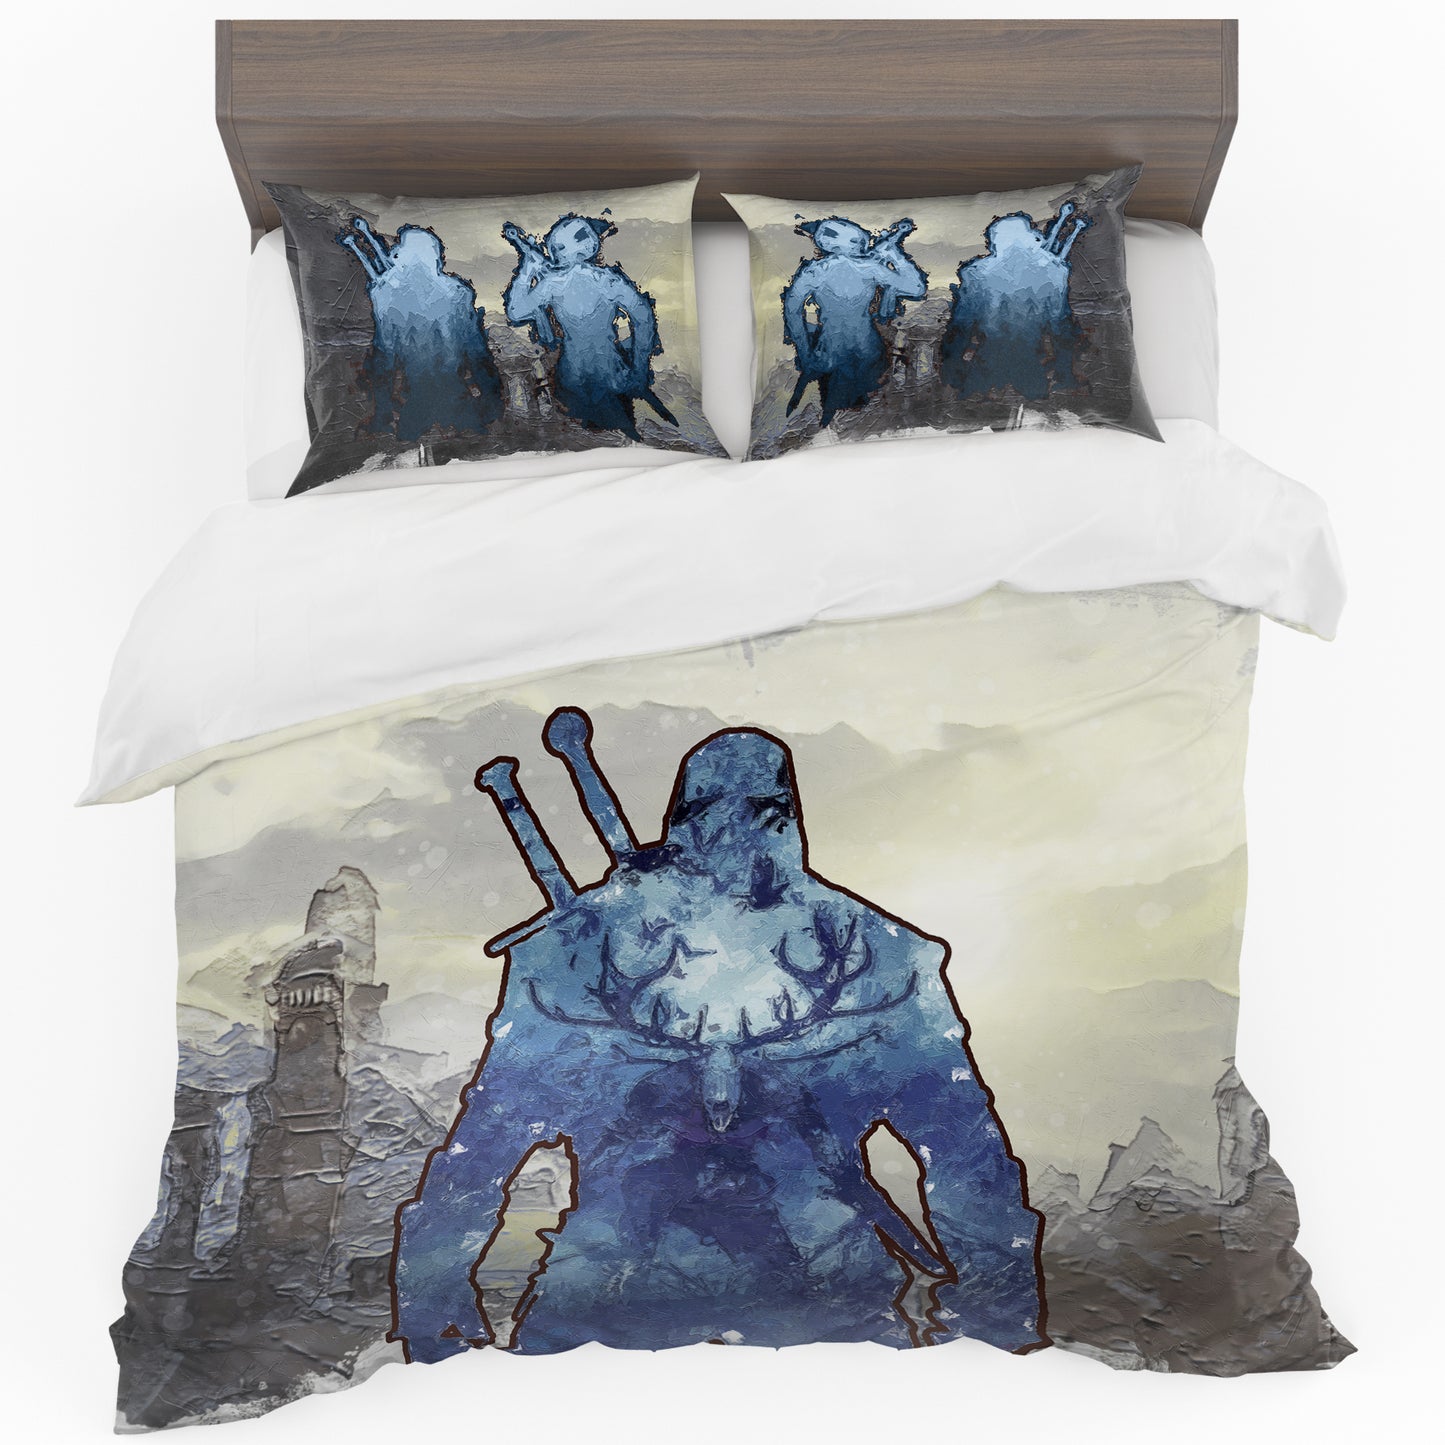 The Witcher Character Duvet Cover Set